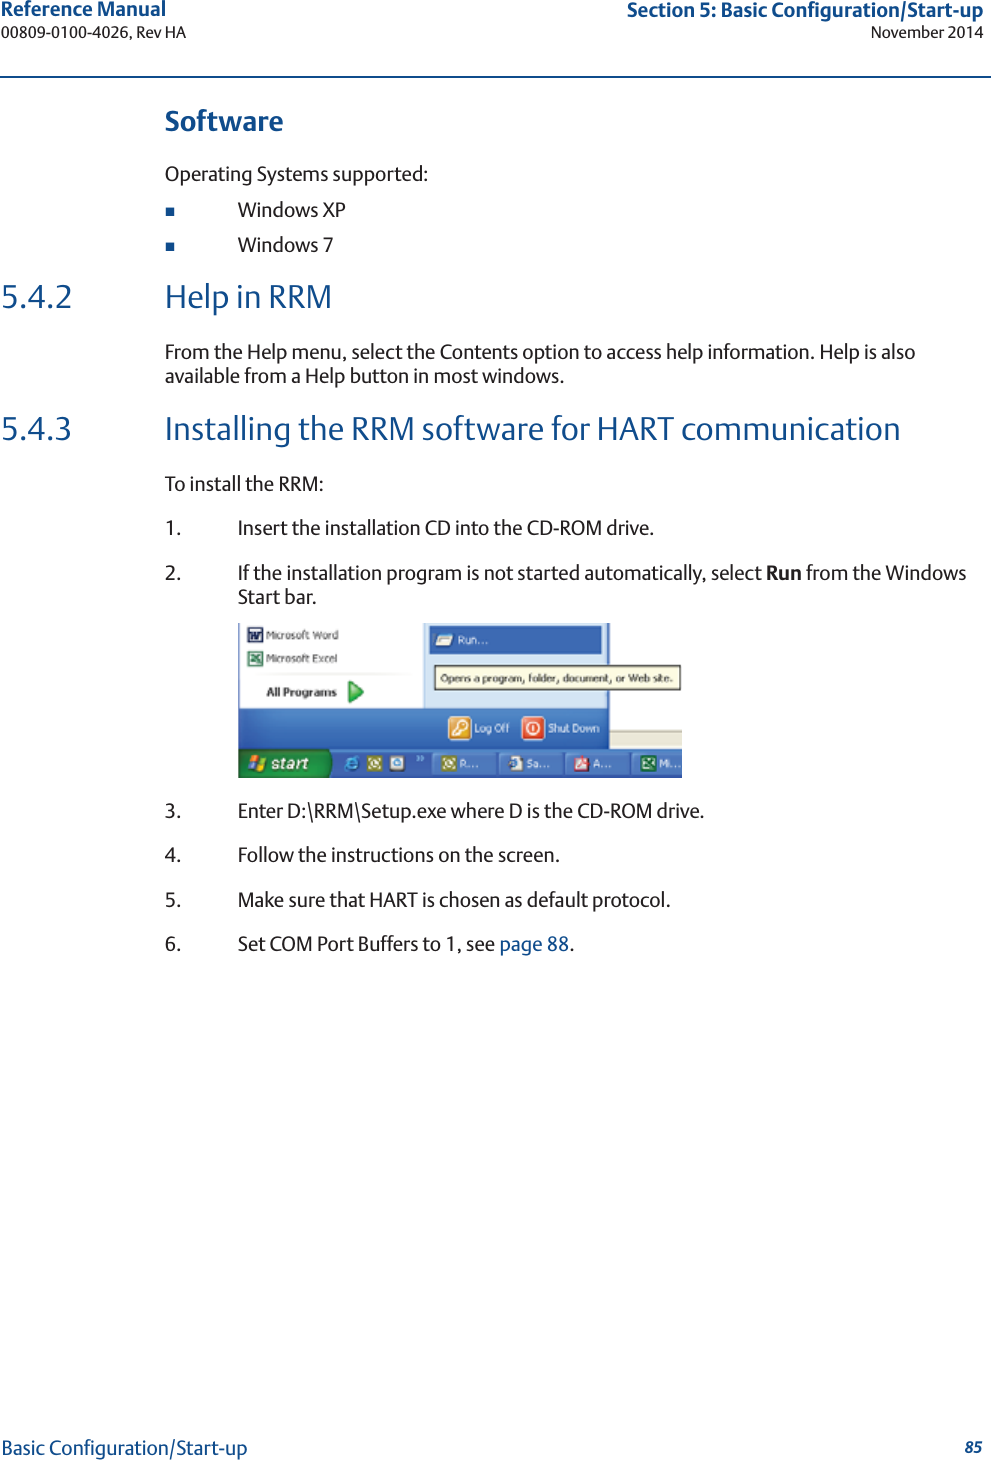 85Reference Manual 00809-0100-4026, Rev HASection 5: Basic Configuration/Start-upNovember 2014Basic Configuration/Start-upSoftwareOperating Systems supported:Windows XPWindows 75.4.2 Help in RRMFrom the Help menu, select the Contents option to access help information. Help is also available from a Help button in most windows.5.4.3 Installing the RRM software for HART communicationTo install the RRM:1. Insert the installation CD into the CD-ROM drive.2. If the installation program is not started automatically, select Run from the Windows Start bar.3. Enter D:\RRM\Setup.exe where D is the CD-ROM drive.4. Follow the instructions on the screen.5. Make sure that HART is chosen as default protocol.6. Set COM Port Buffers to 1, see page 88.